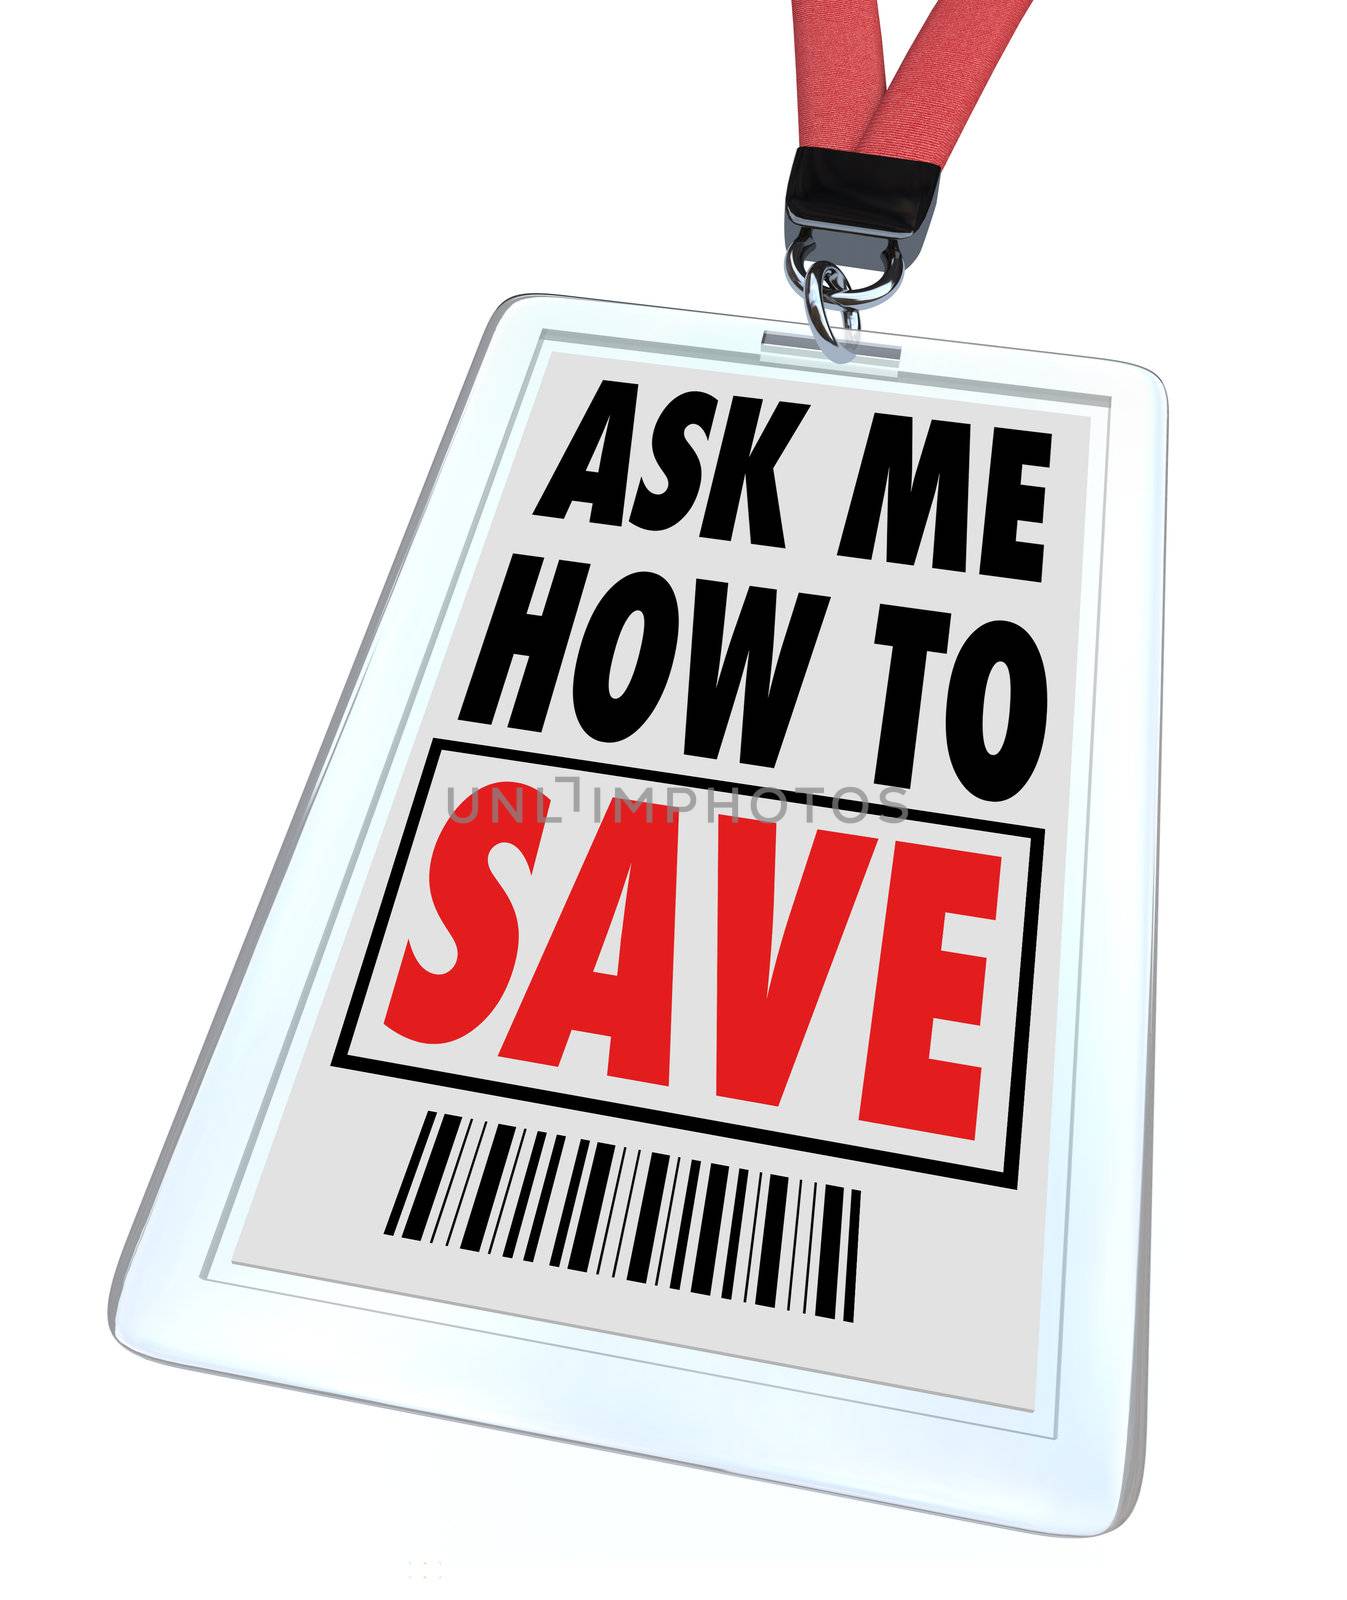 A badge and lanyard with printed pass reading Ask Me How to Save, representing a customer service staff person's desire to help answer questions and offer guidance on saving money